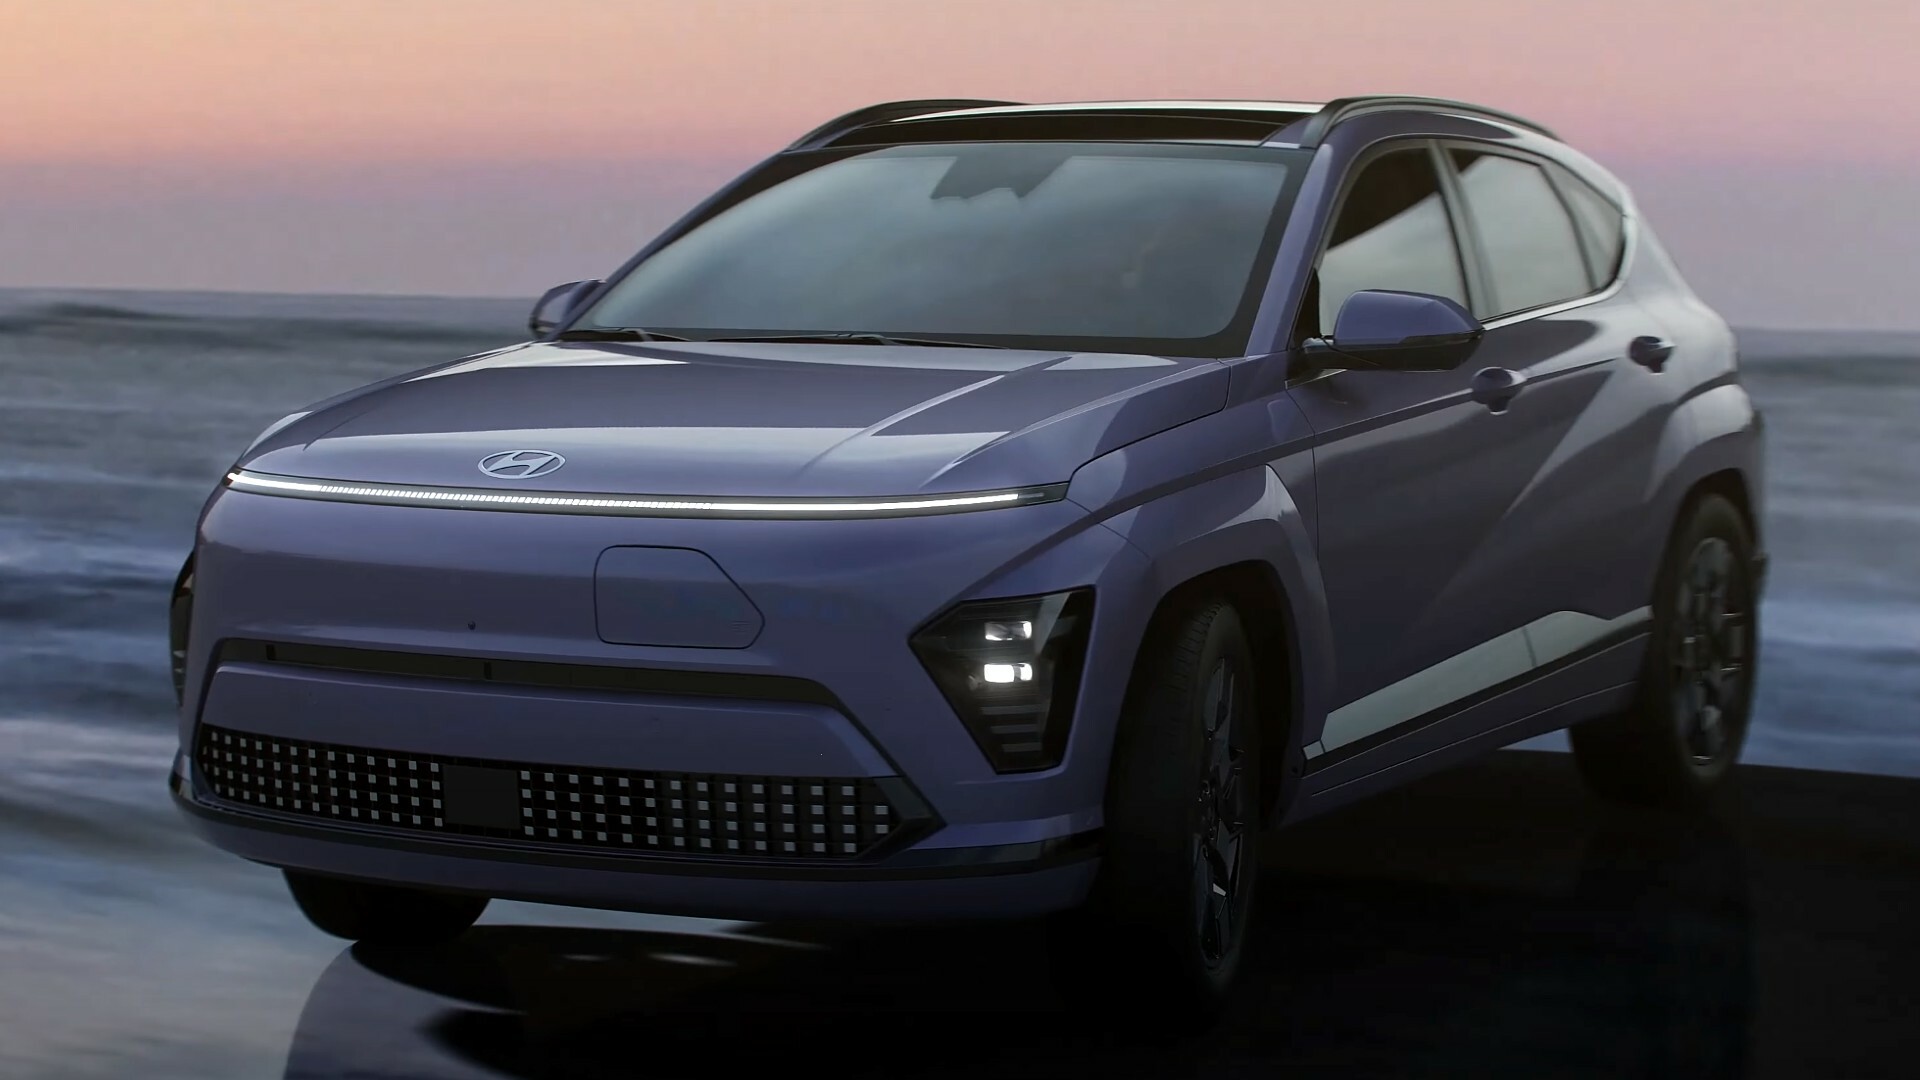 Here’s A Closer Look At The New Hyundai Kona Electric Auto Recent